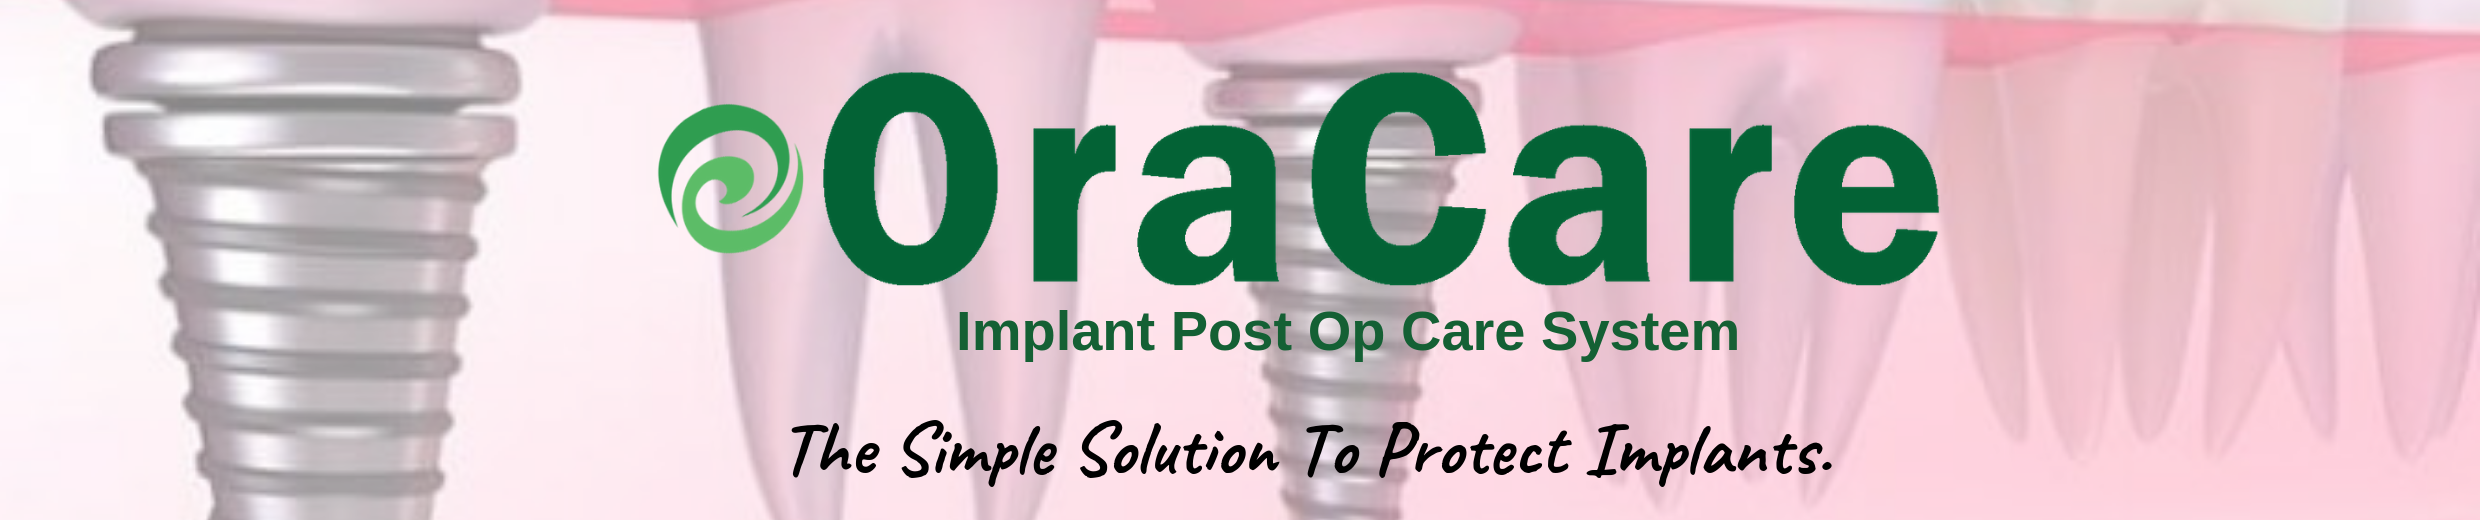 OraCare Implant Post Op Care System Advertisement